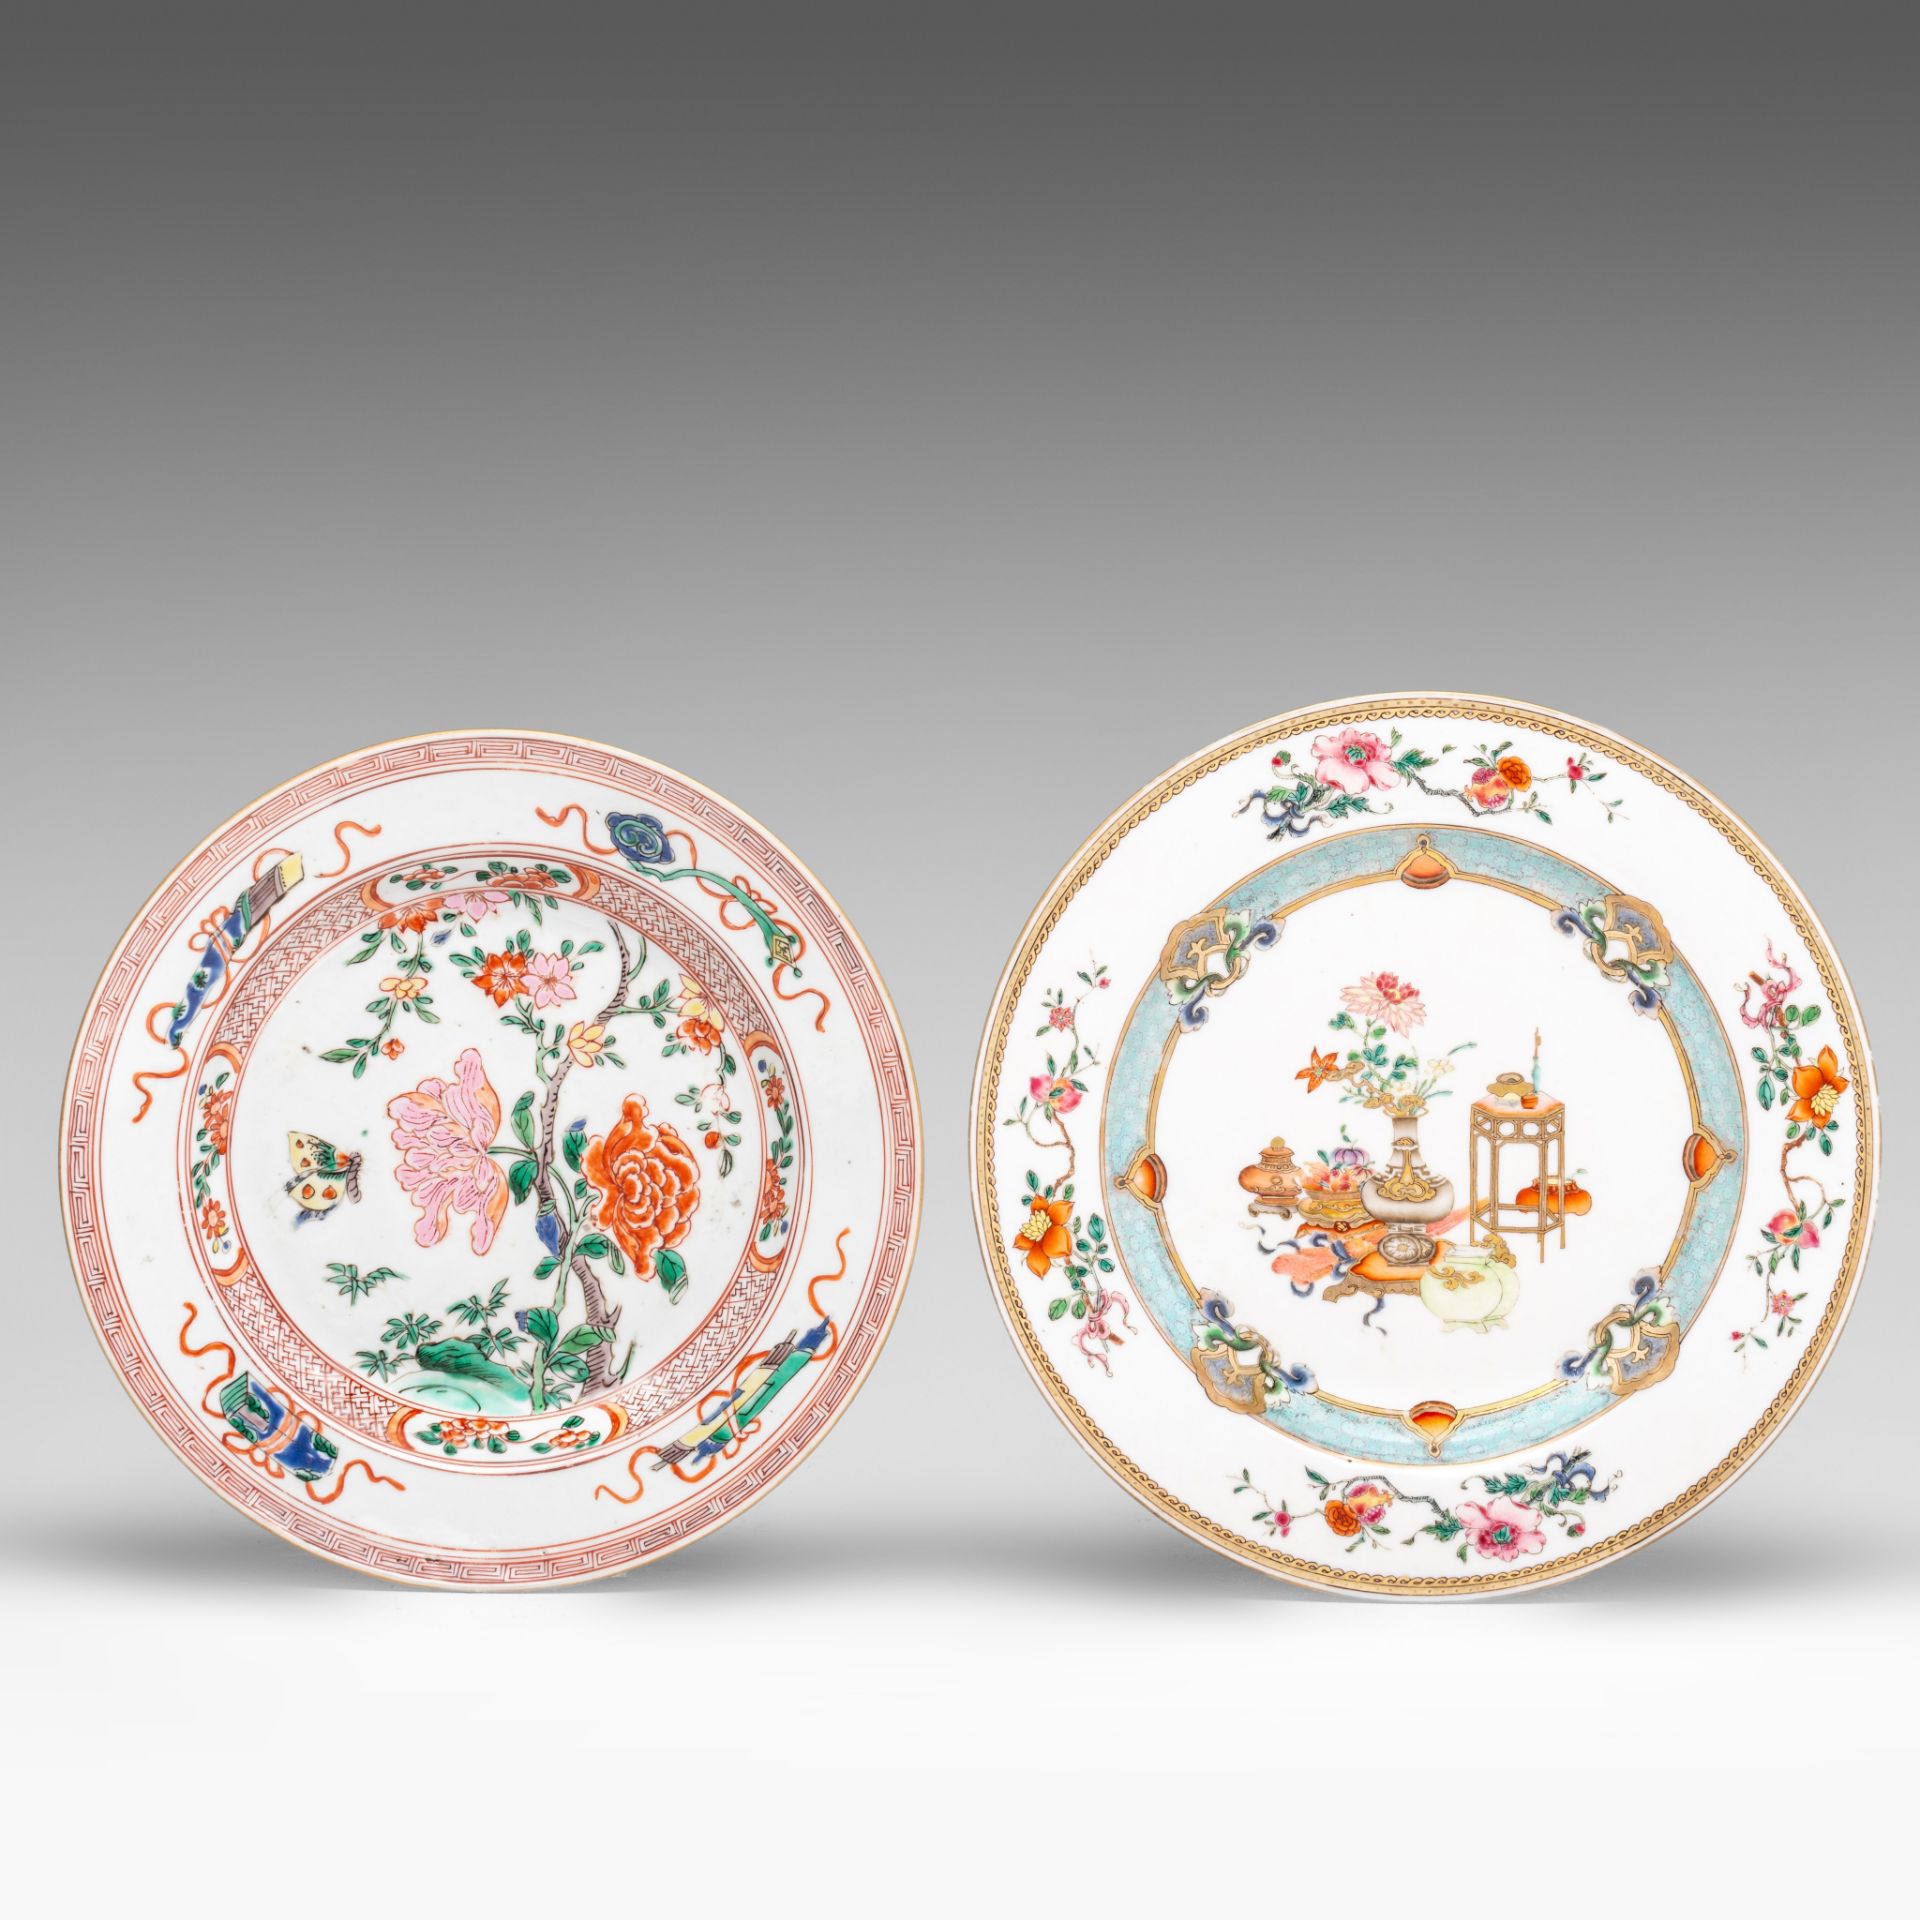 A fine Chinese famille rose 'Hundred Antiquities' plate, Yongzheng period, dia 23,7 cm - added a dit - Image 3 of 4